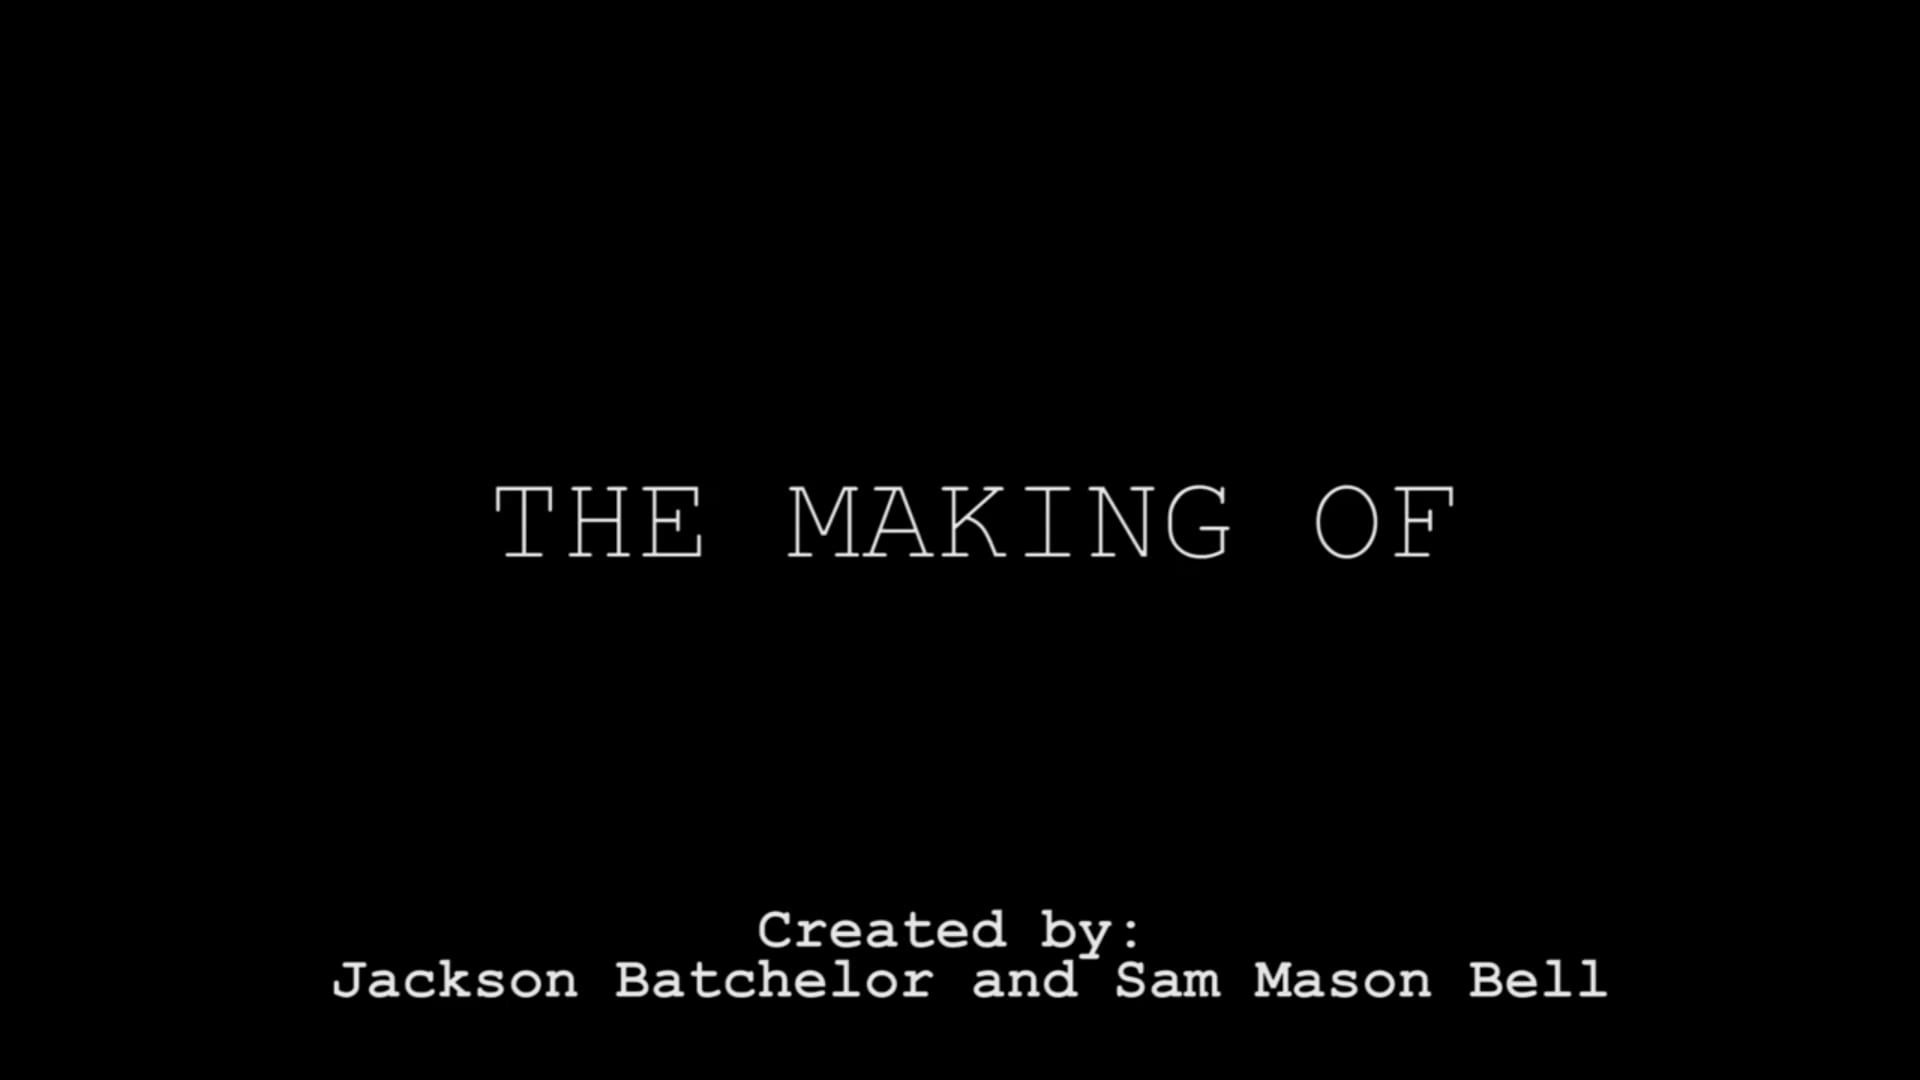 Watch THE MAKING OF: S1E1 on our Free Roku Channel